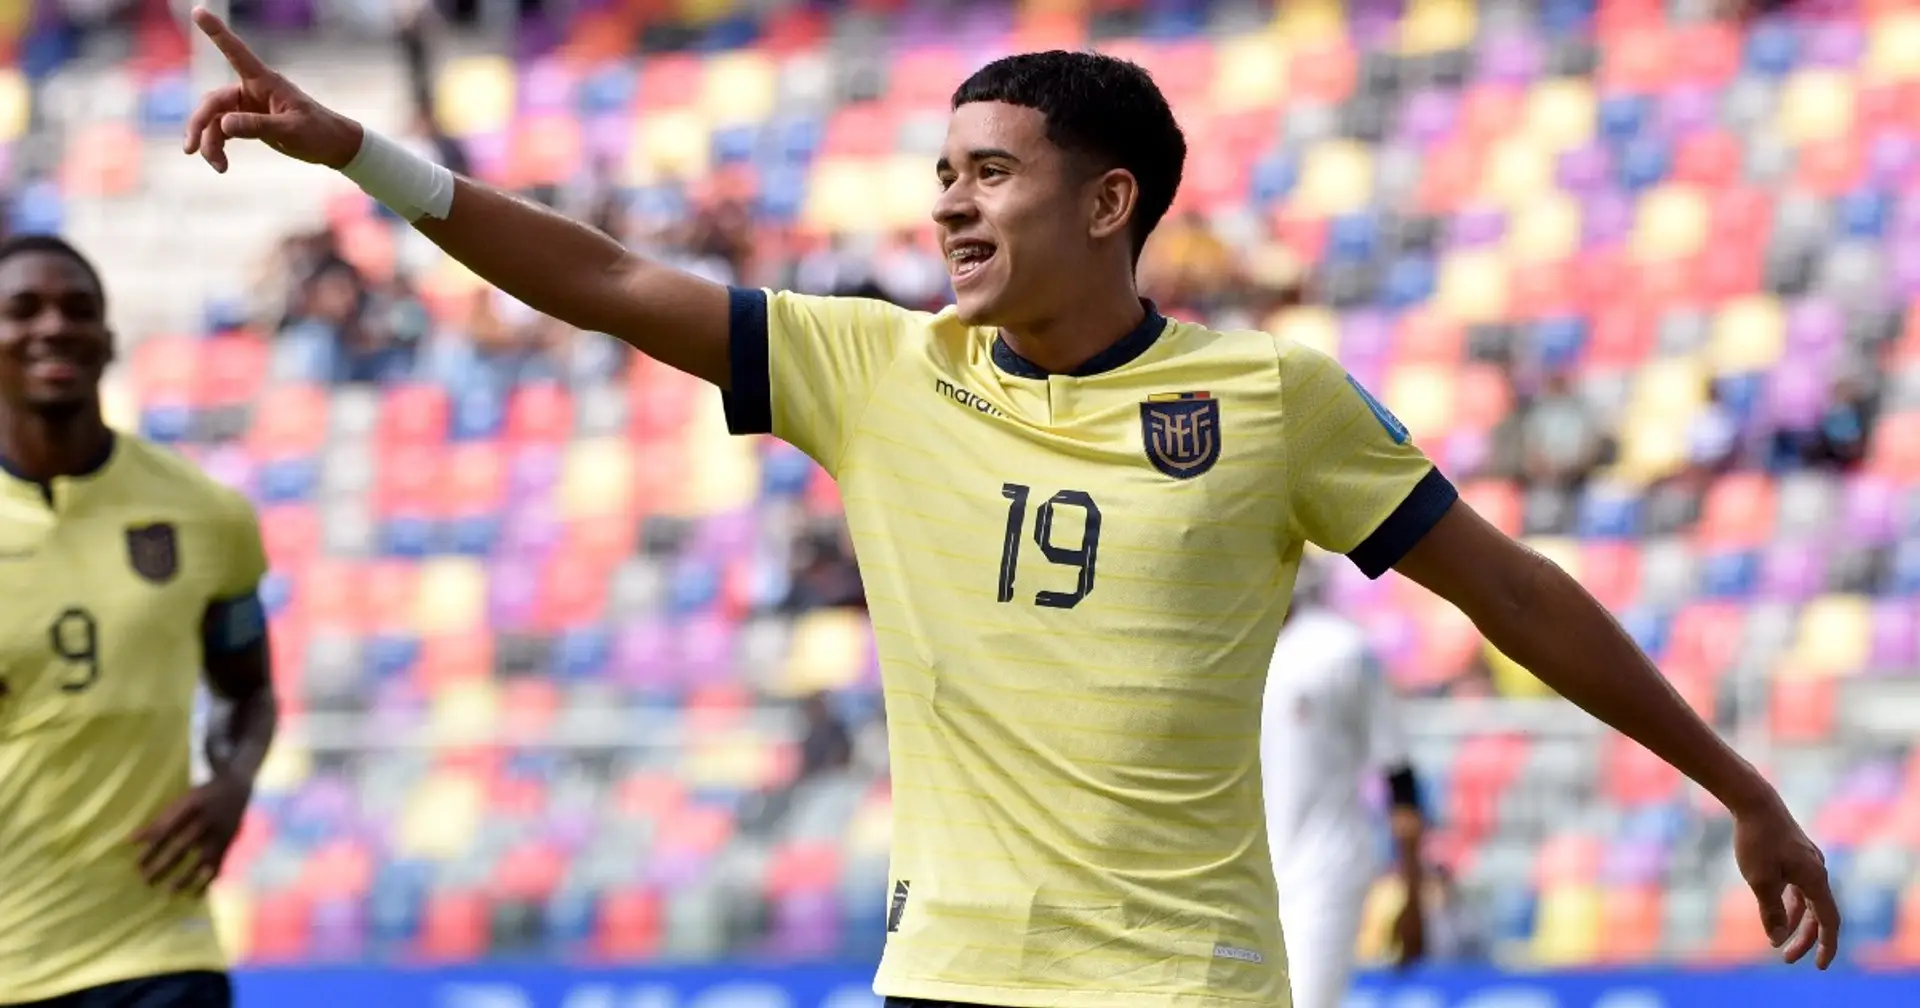 Future Chelsea midfielder Kendry Paez makes history with goal for Ecuador at U20 World Cup